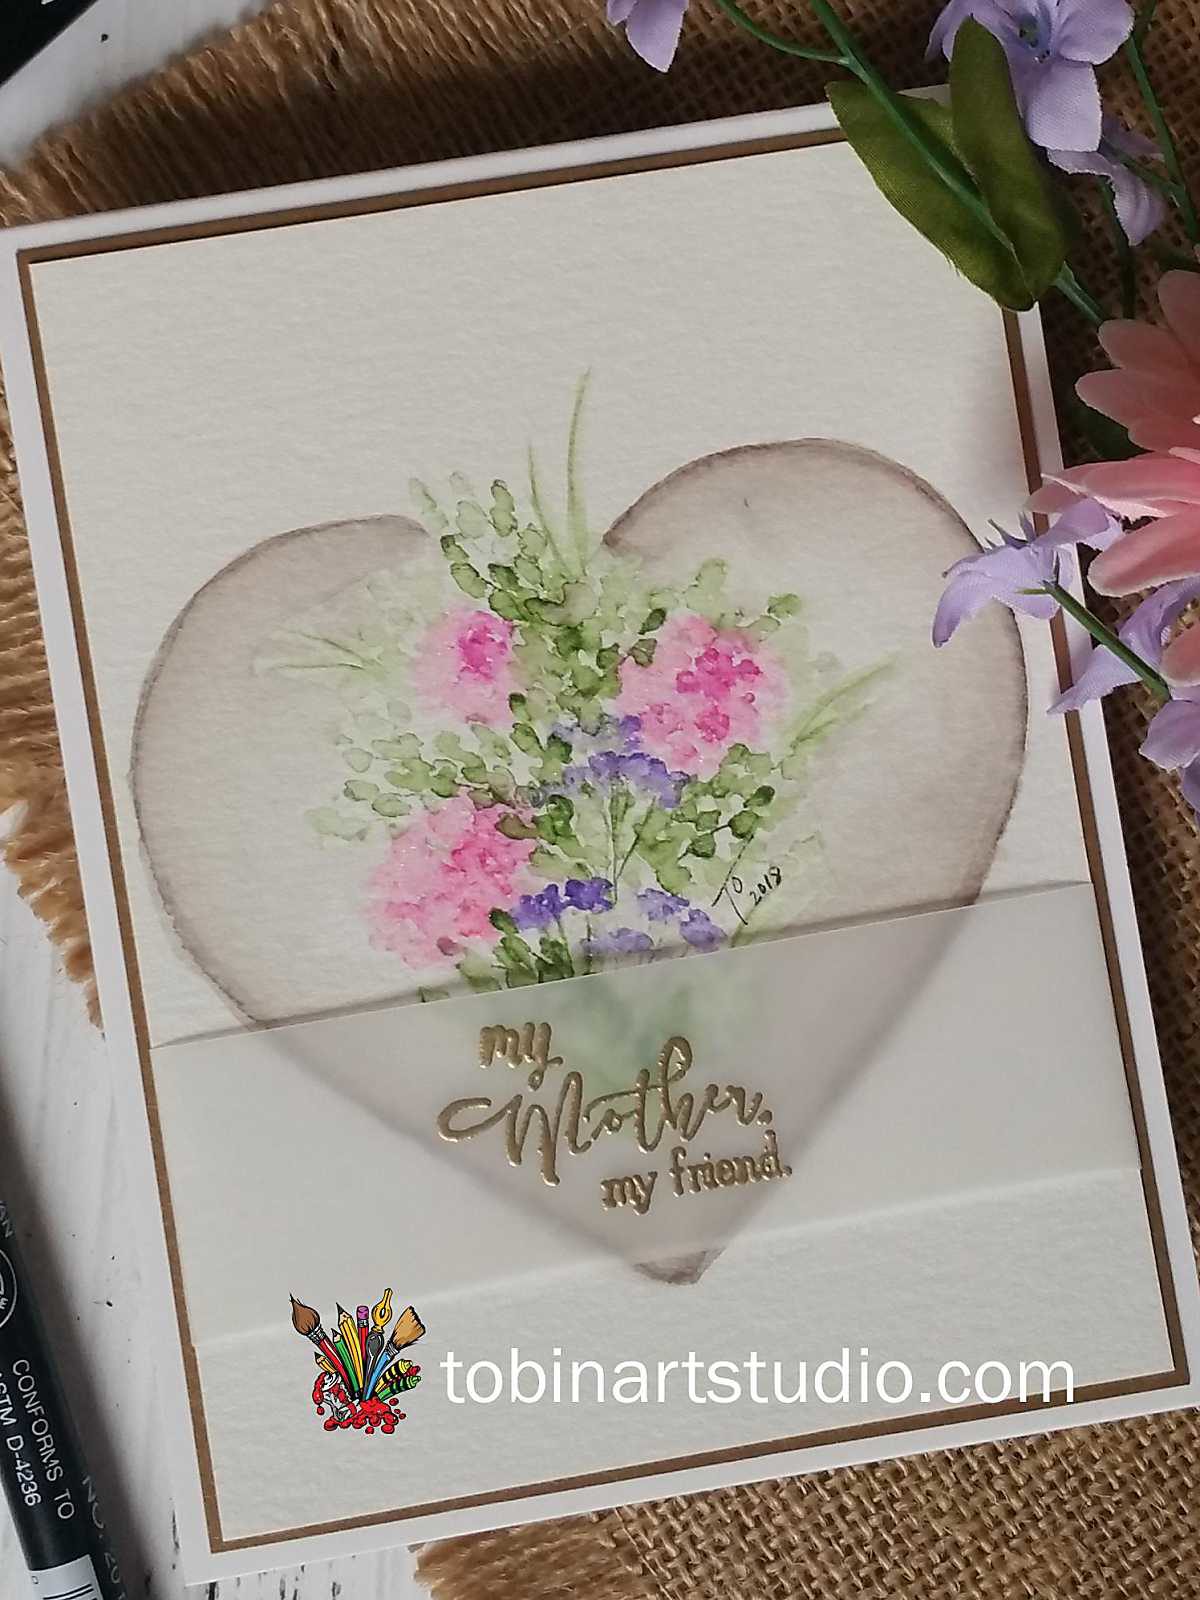 Mother's Day Heart